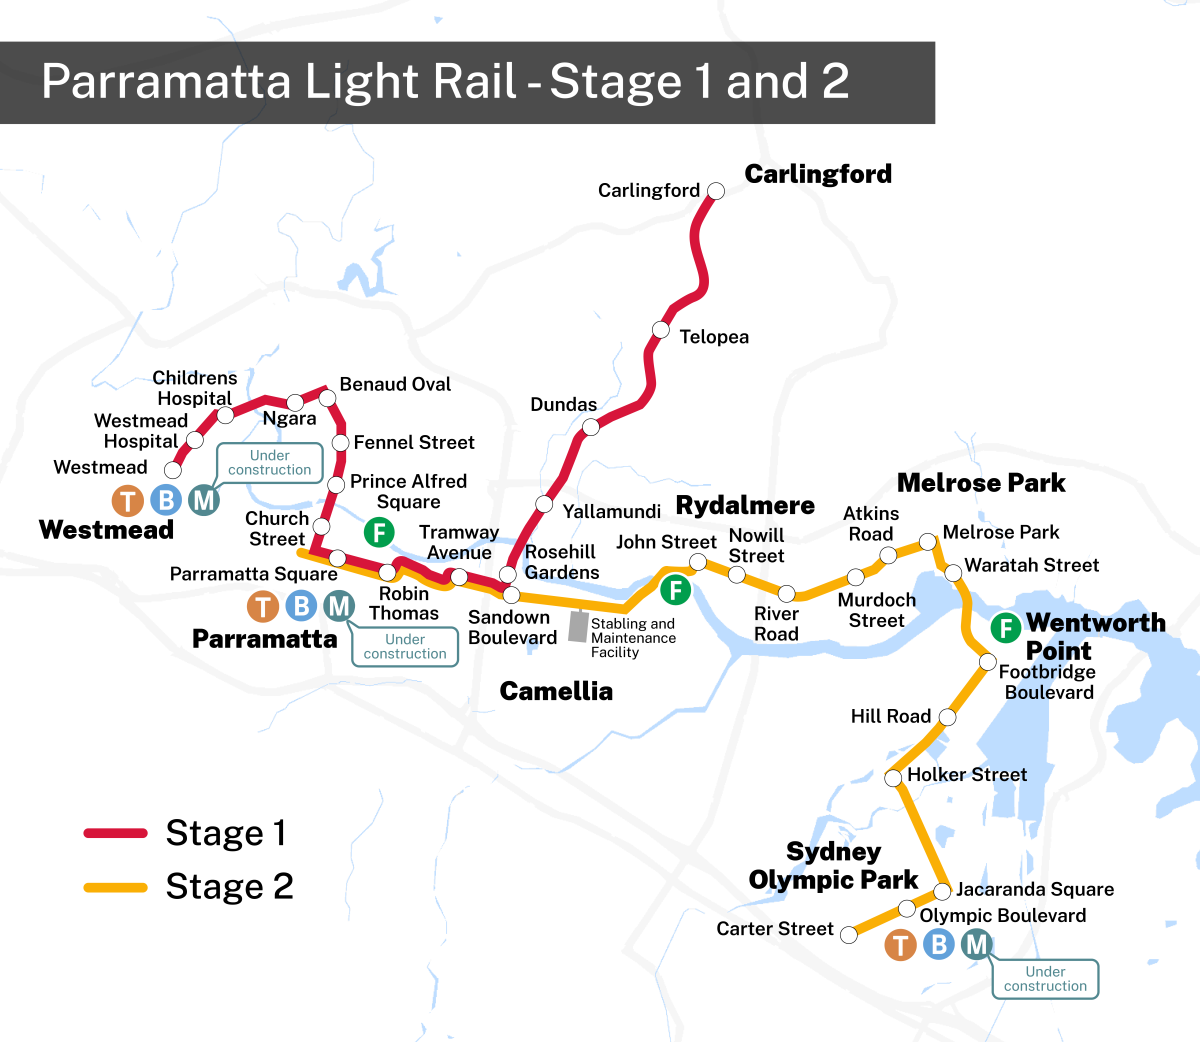 A static map displaying stages 1 and 2 of the Parramatta Light Rail. Stage 1 will have 16 stops across Carlingford, Camellia, Parramatta CBD, Parramatta North and Westmead. Stage 2 will have 14 stops across Rydalmere, Ermington, Melrose Park, Wentworth Point, Sydney Olympic Park, and Carter Street.